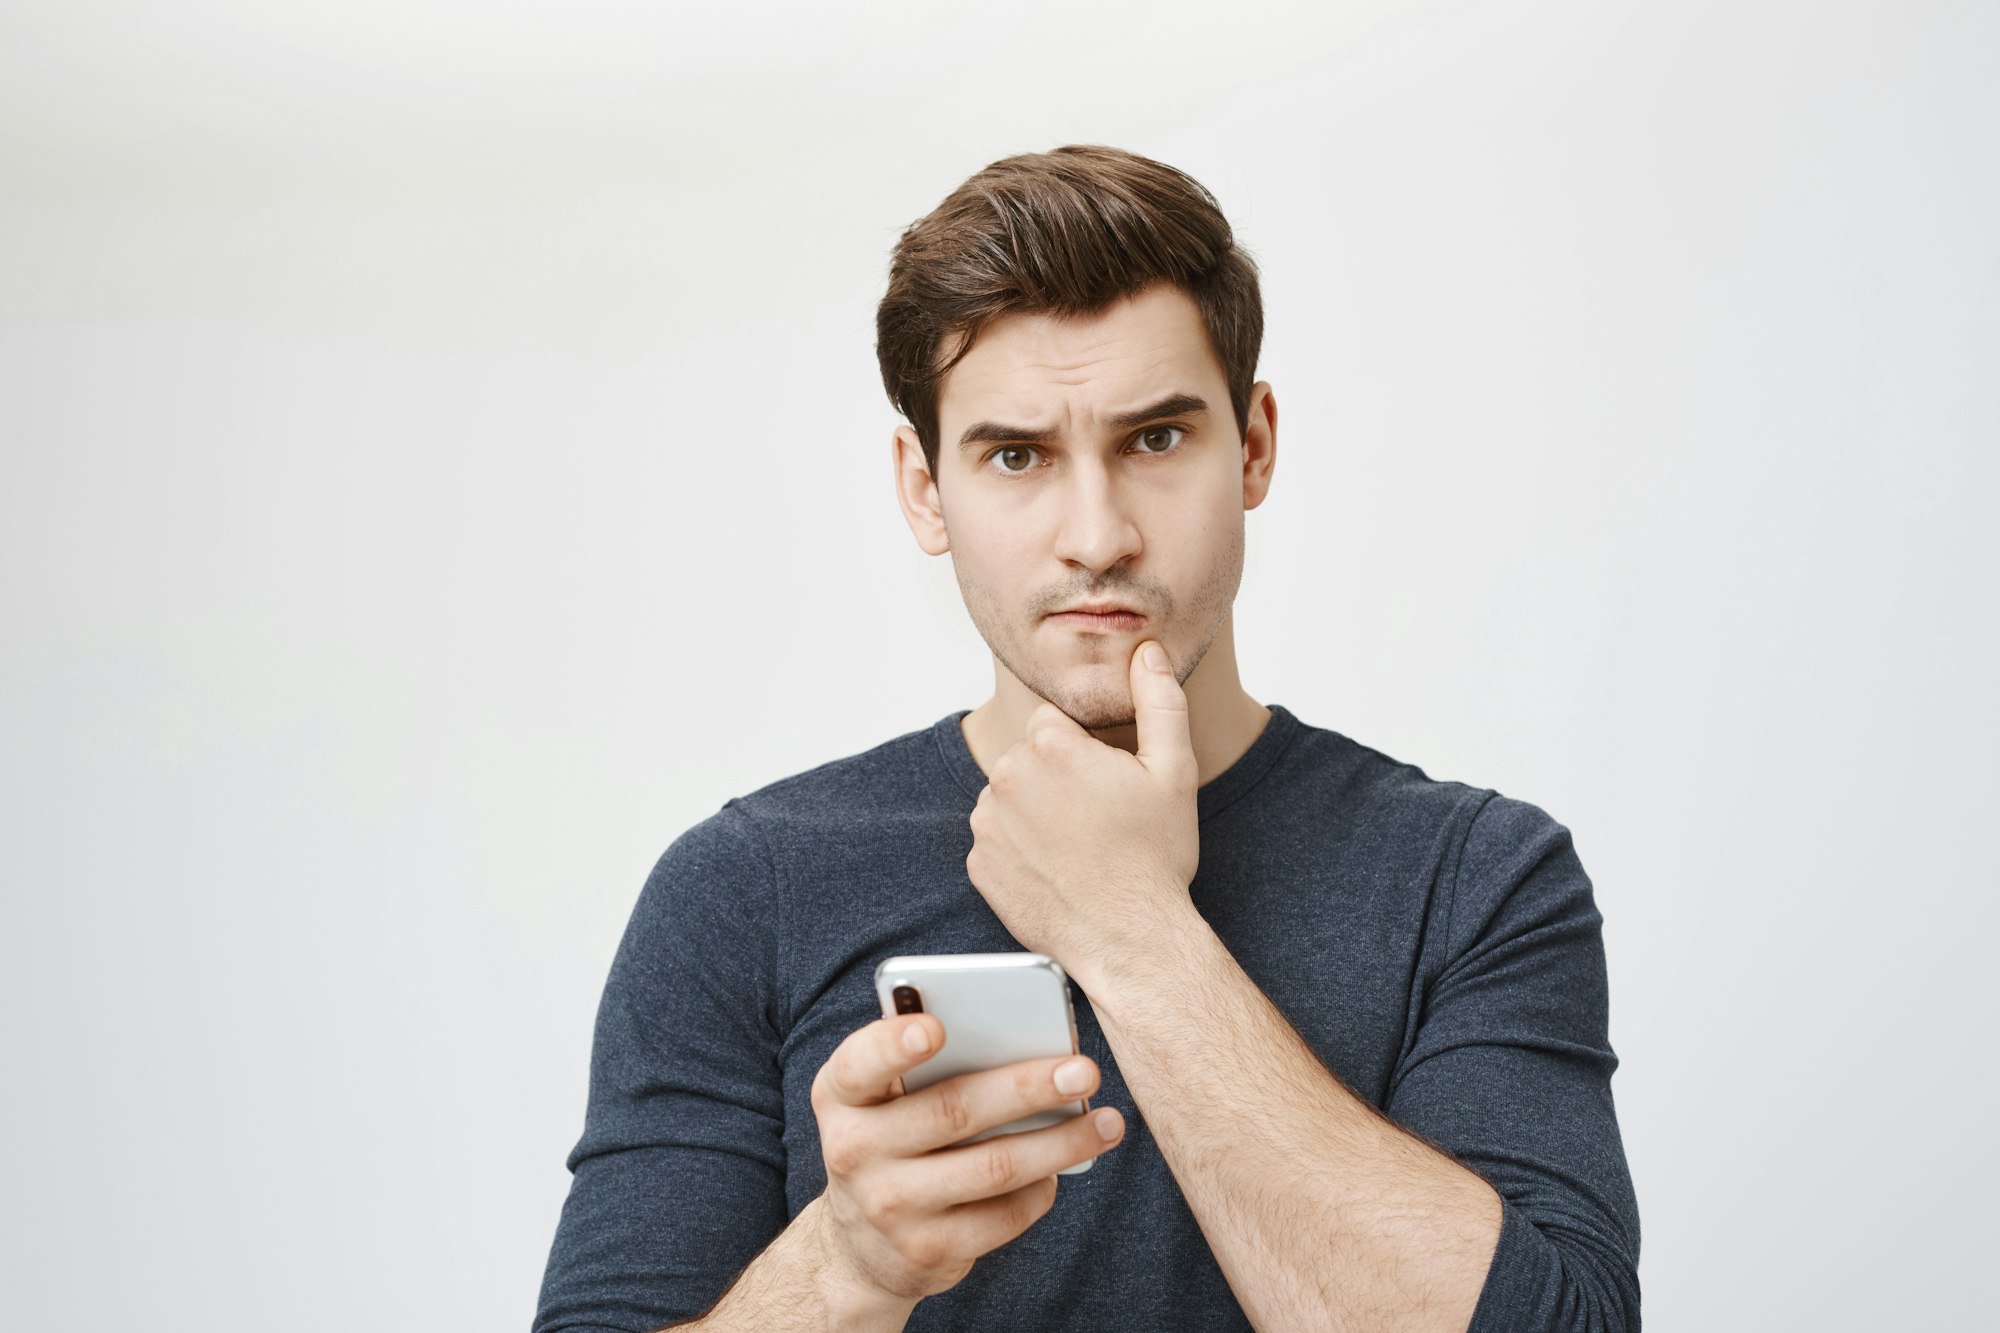 Indoor shot of young caucasian student looking worried and perplexed while holding smartphone and